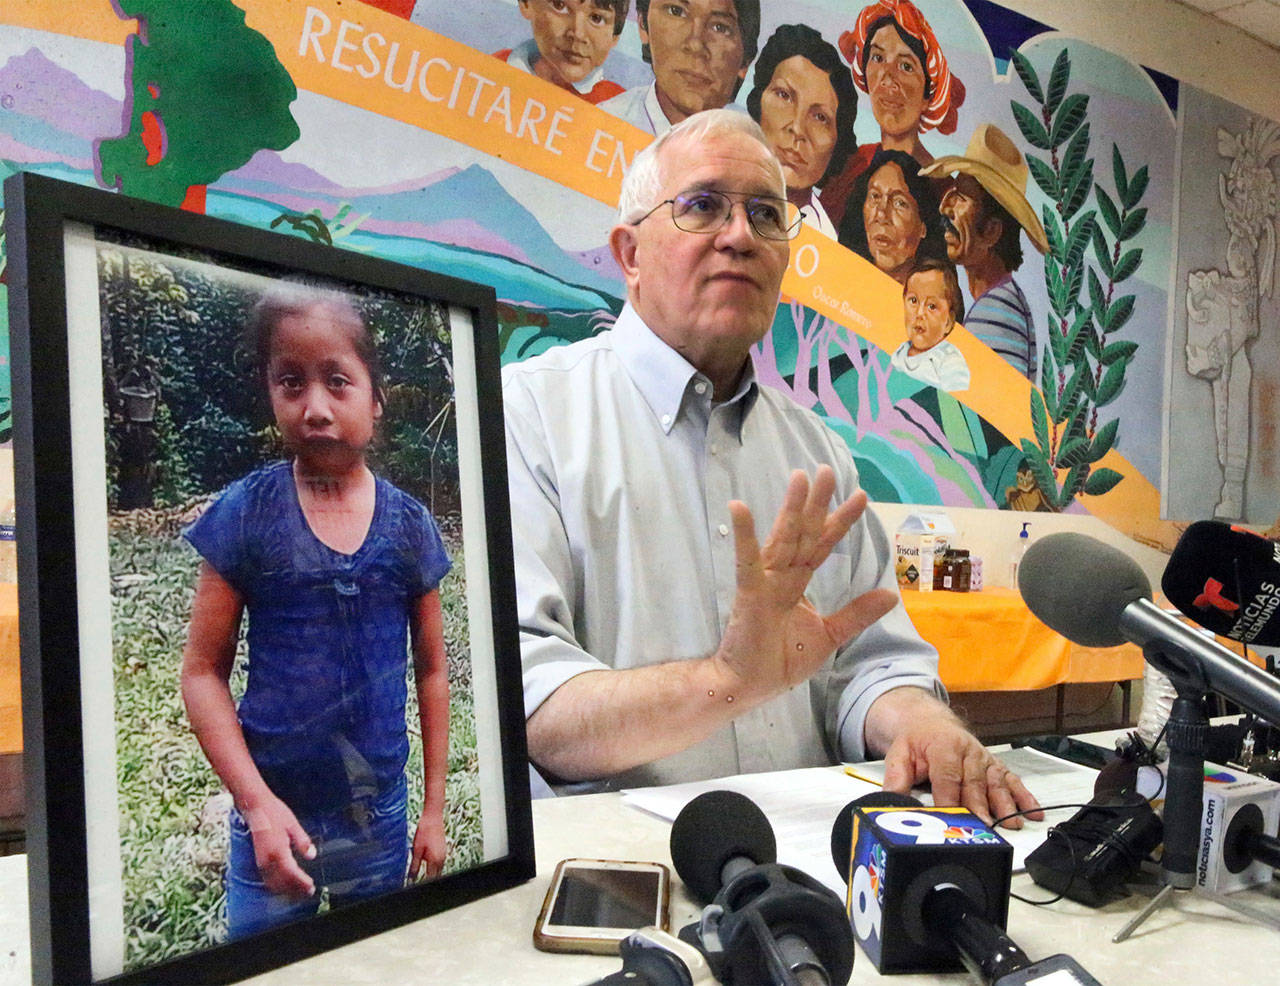 Annunciation House director Ruben Garcia answers questions from the media Dec. 15, after reading a statement from the family of Jakelin Caal Maquin, pictured at left, during a press briefing at Casa Vides in downtown El Paso, Texas. Caal, died Dec. 8 in El Paso. She showed signs of sepsis shock, a potentially fatal condition brought on by infection, officials said. (Rudy Gutierrez/The El Paso Times via AP, File)